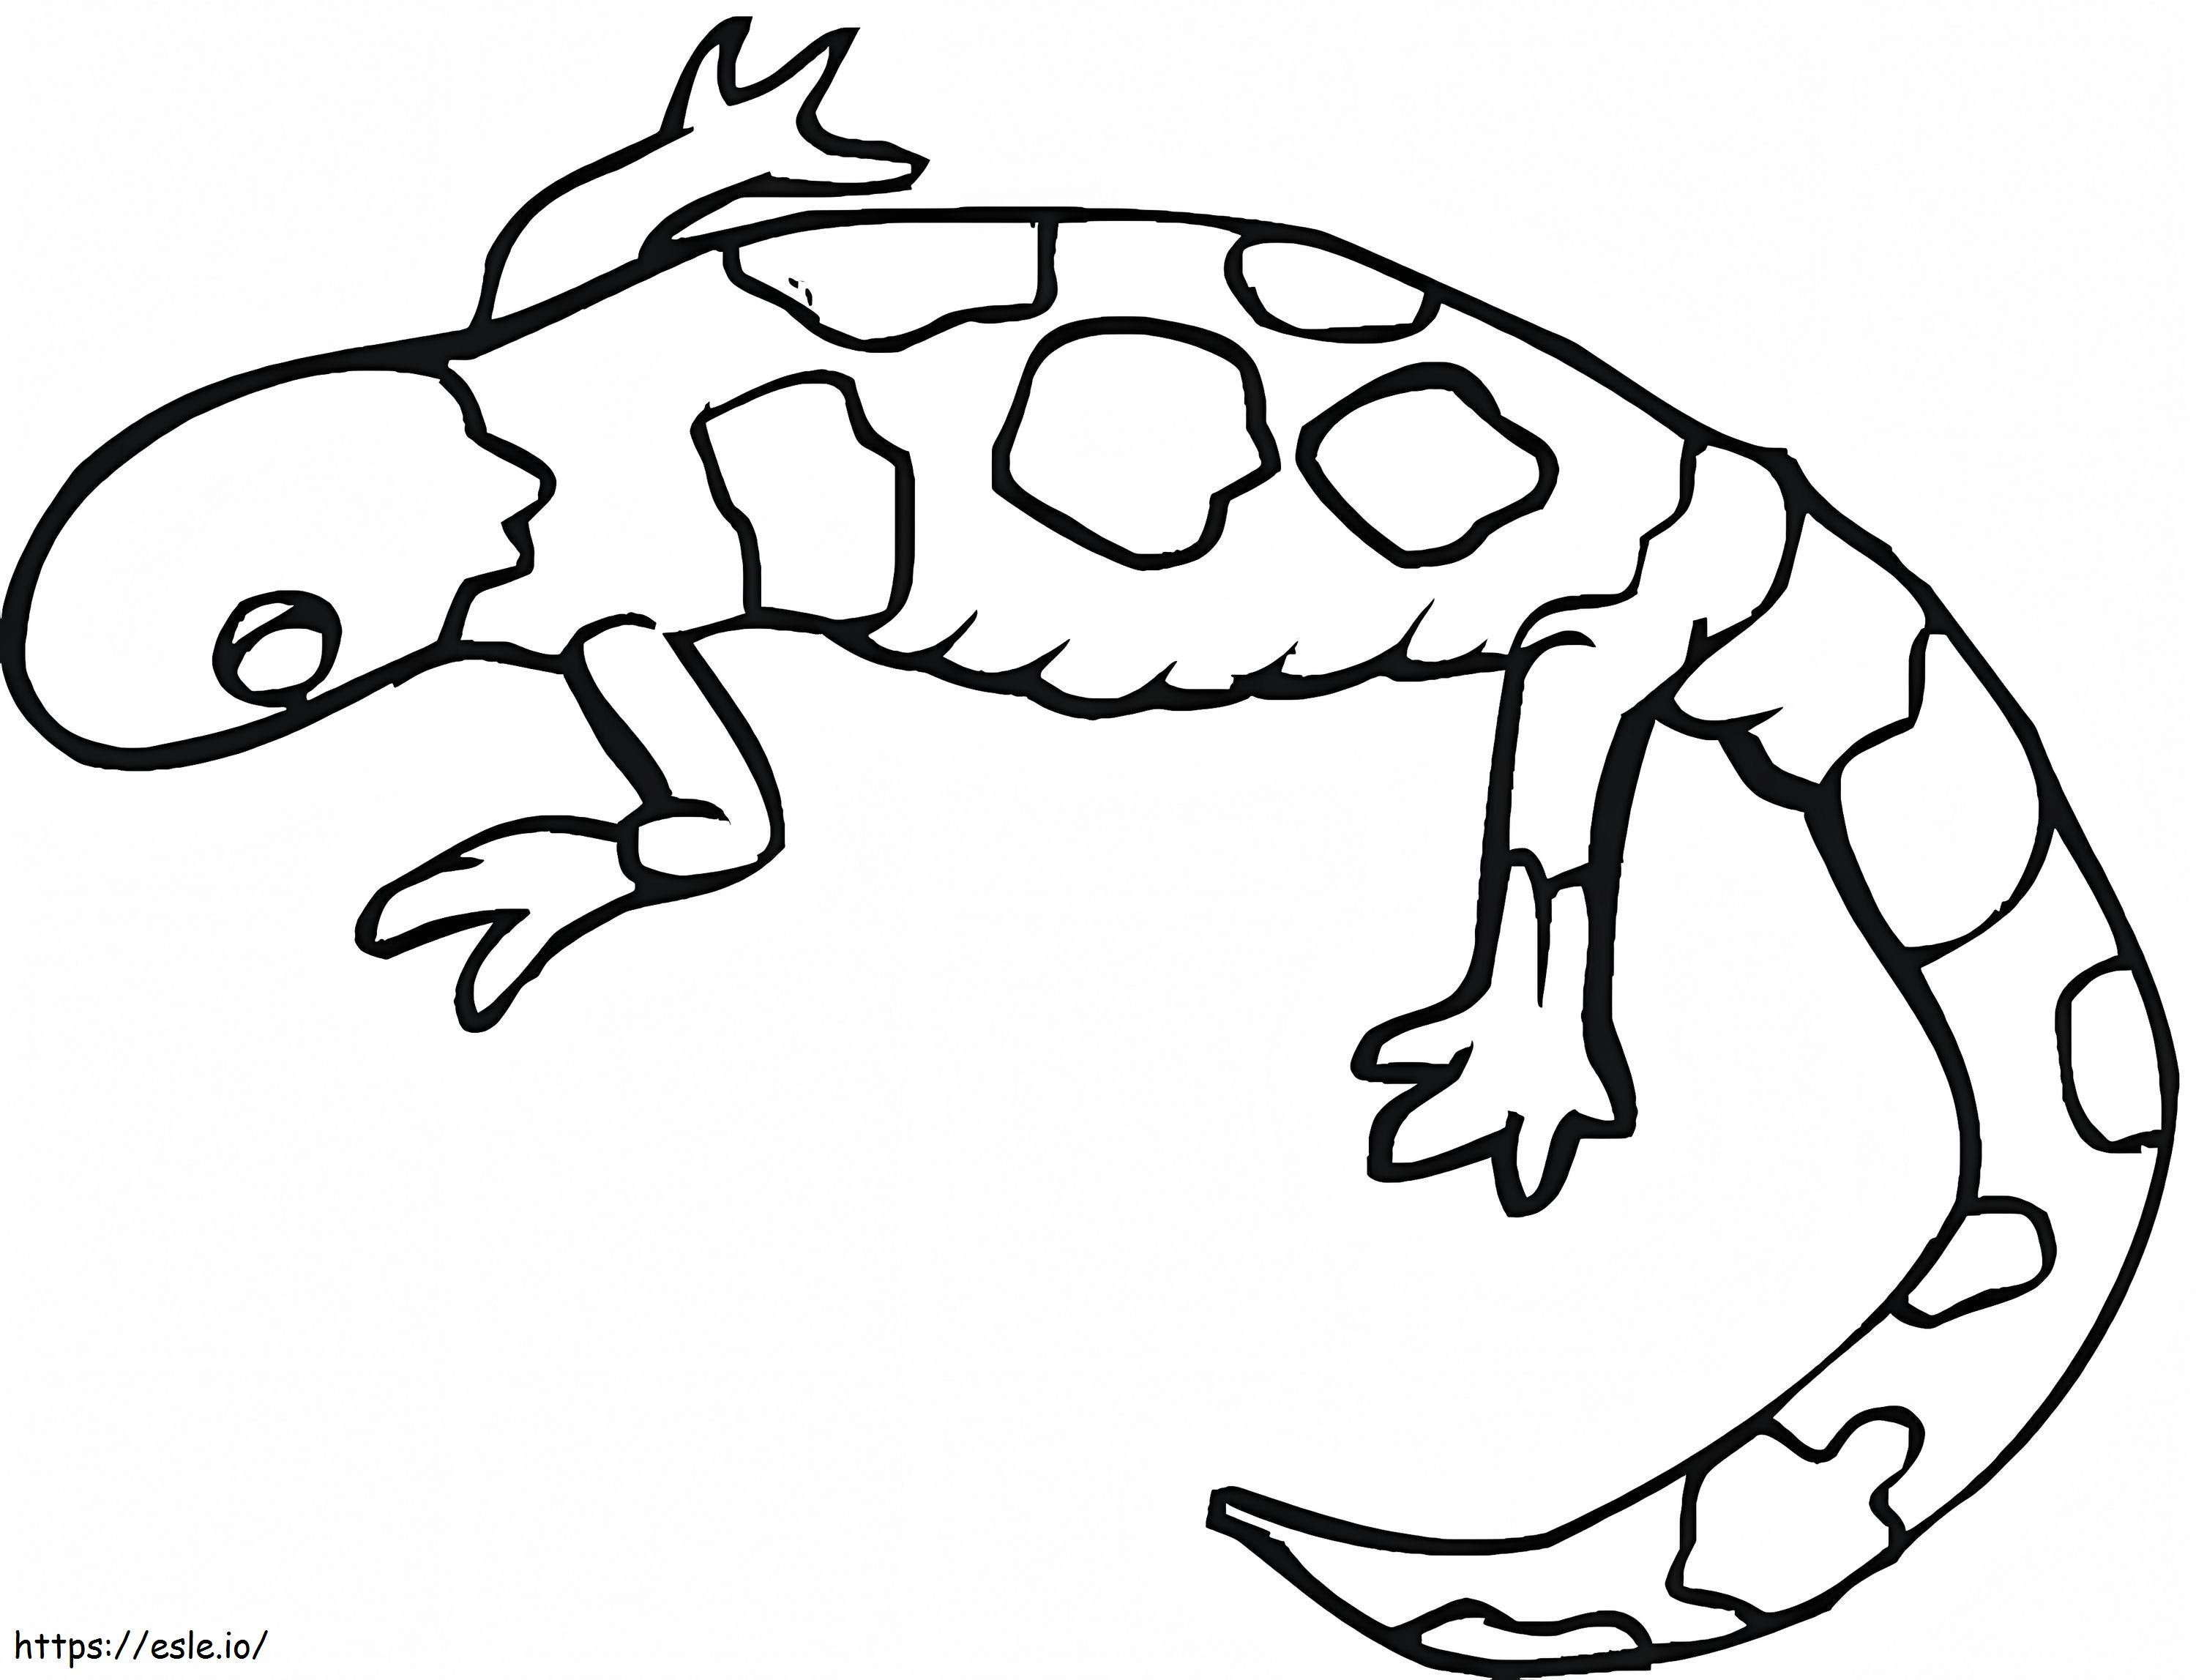 Free Gecko coloring page